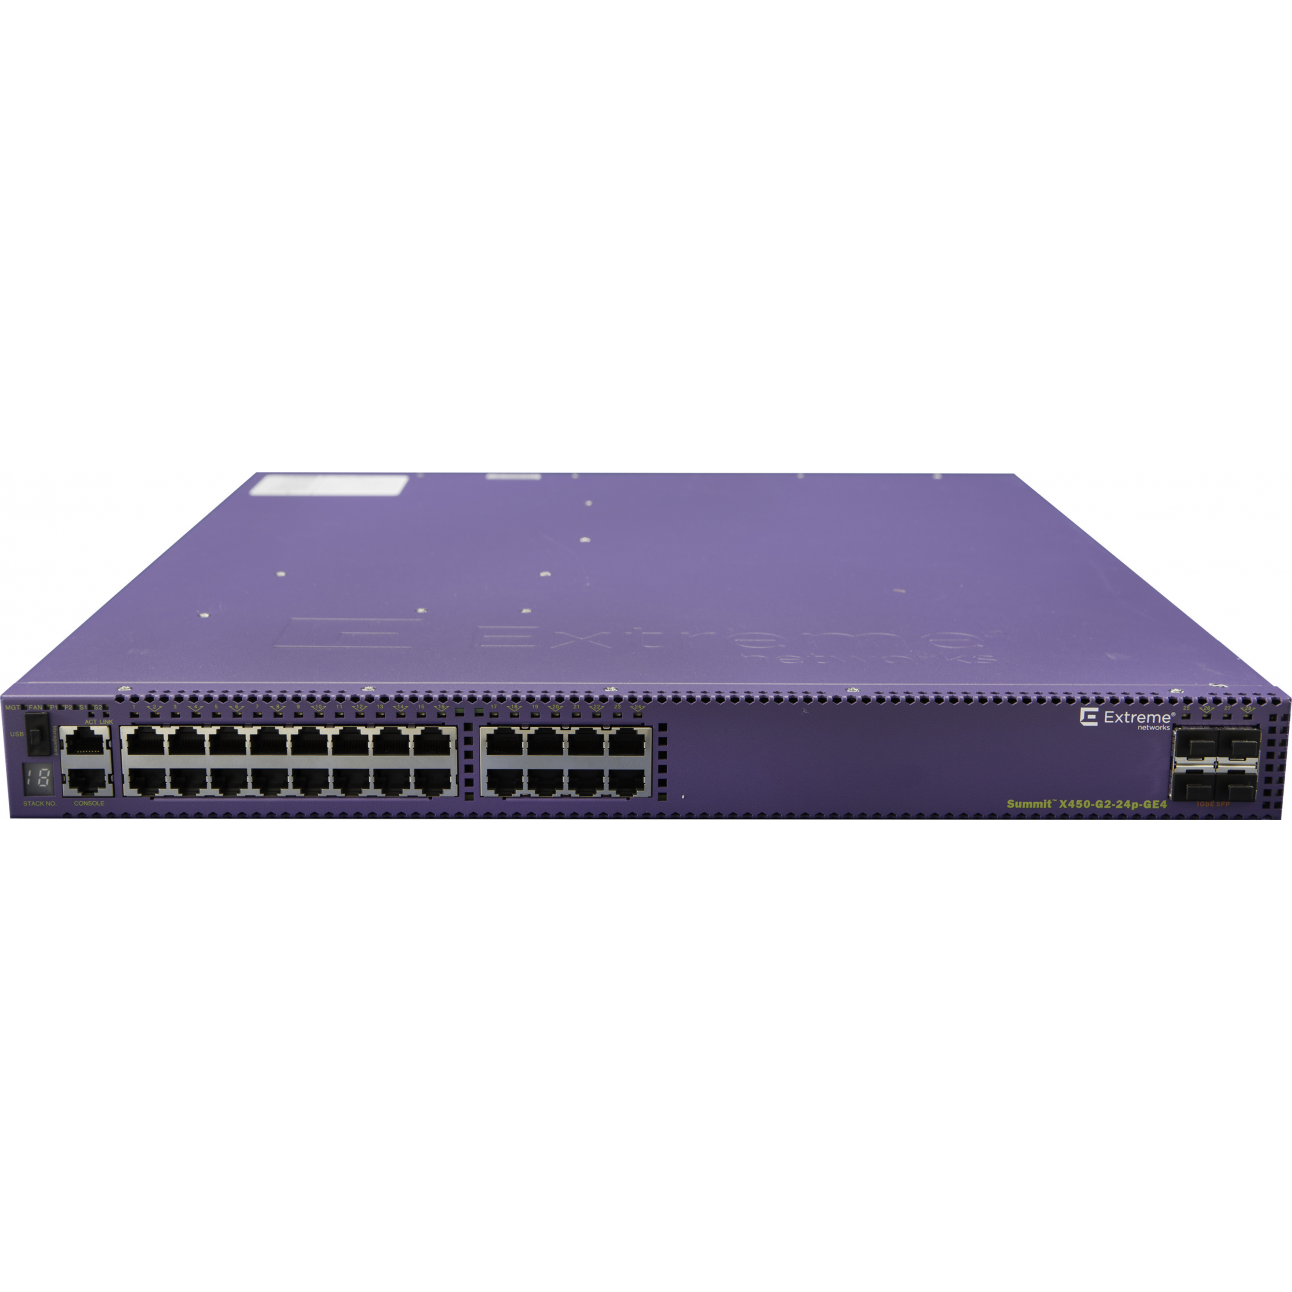 Коммутатор Extreme Summit X450-G2 24 10/100/1000BASE-T POE+, 4 1000BASE-X unpopulated SFP,two 21Gb stacking ports, 2 unpopulated power supply slots, fan module slot (unpopulated), ExtremeXOS Edge license